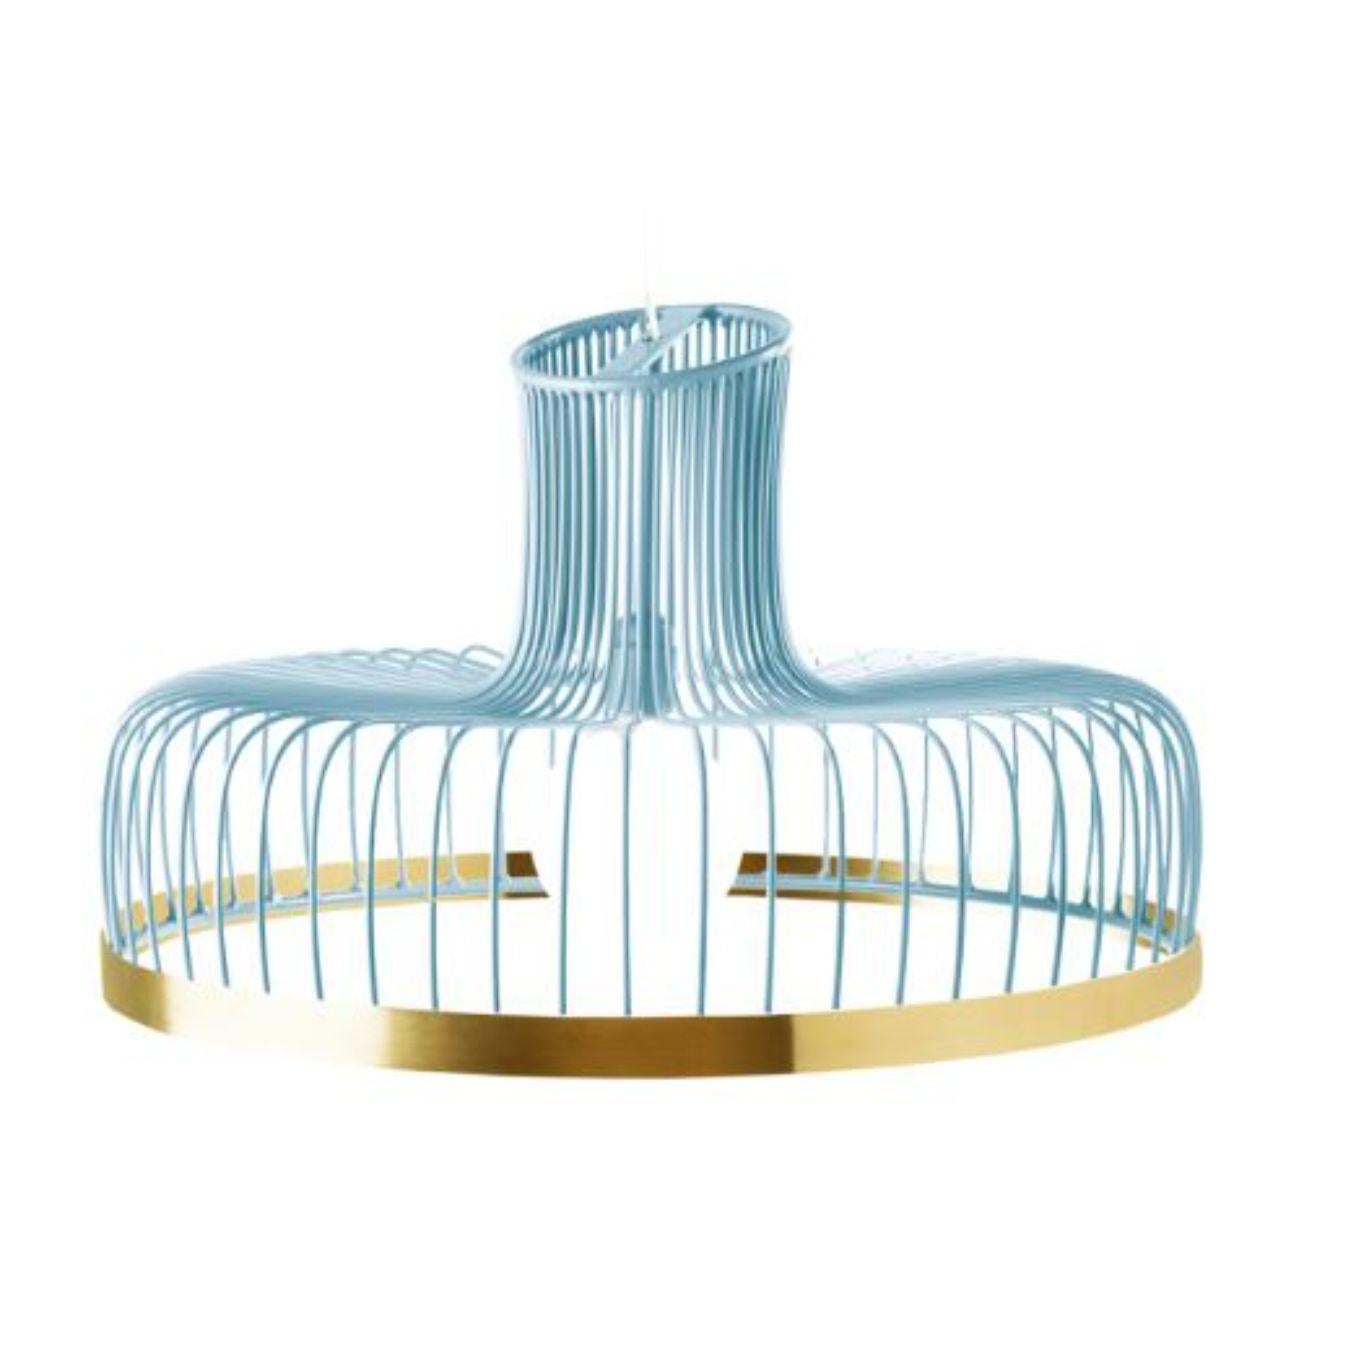 Jade new spider suspension lamp with brass ring by Dooq
Dimensions: W 70 x D 70 x H 35 cm
Materials: lacquered metal, polished or brushed metal, brass.
Also available in different colors and materials. 

Information:
230V/50Hz
E27/1x20W